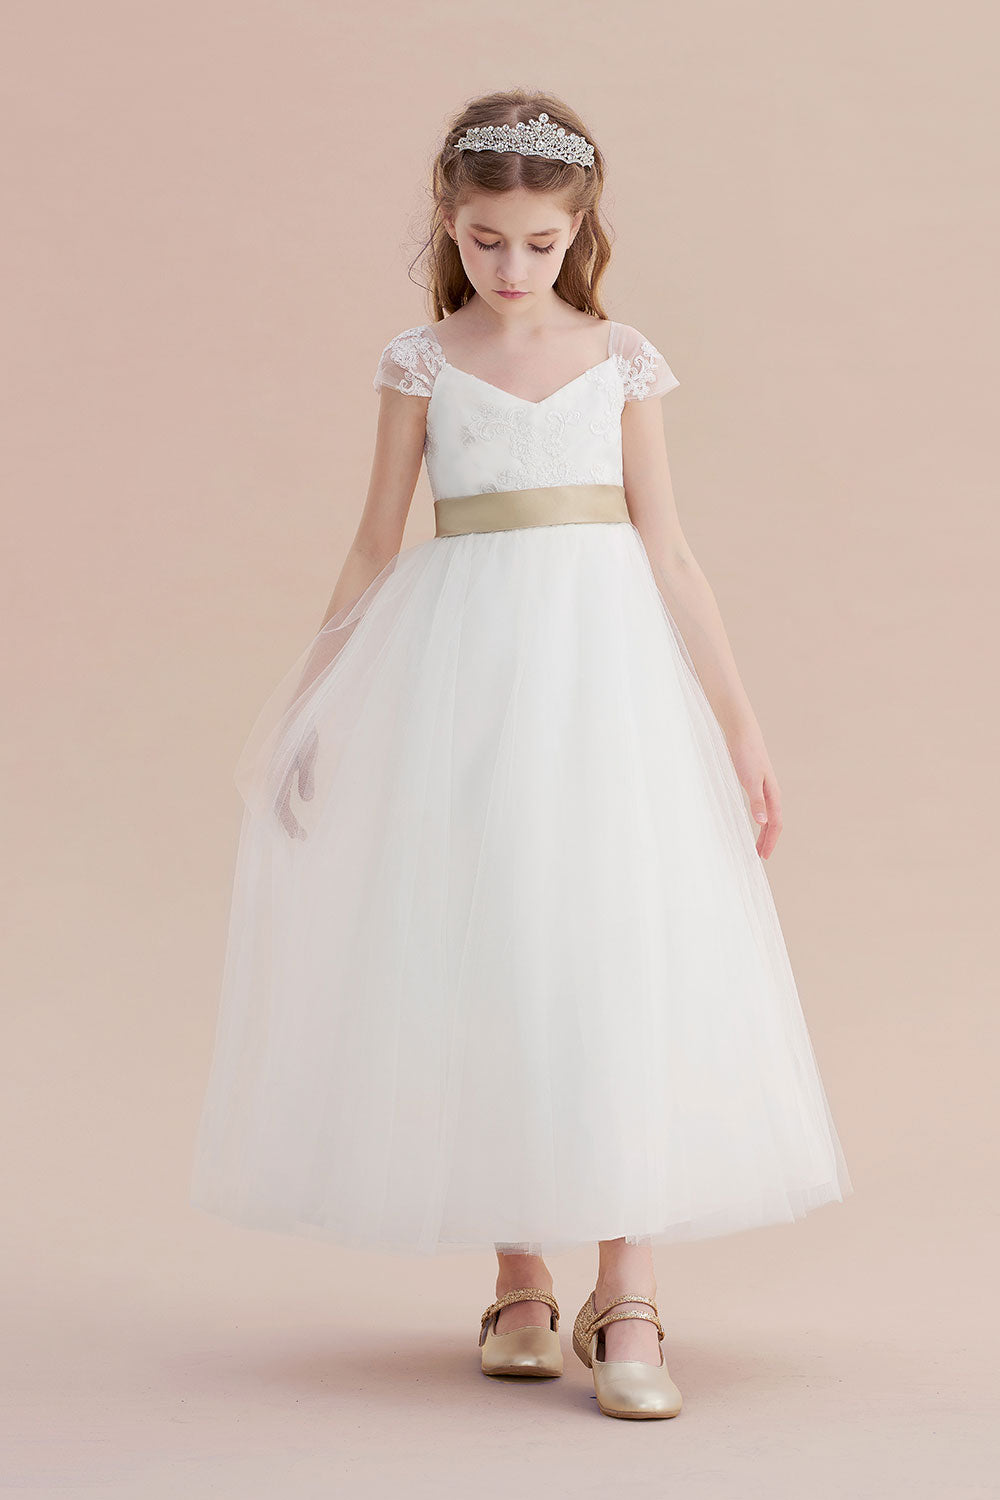 Oknass Cap Sleeve Sweetheart A-line Flower Girl Dress Tulle with Lace Ribbons